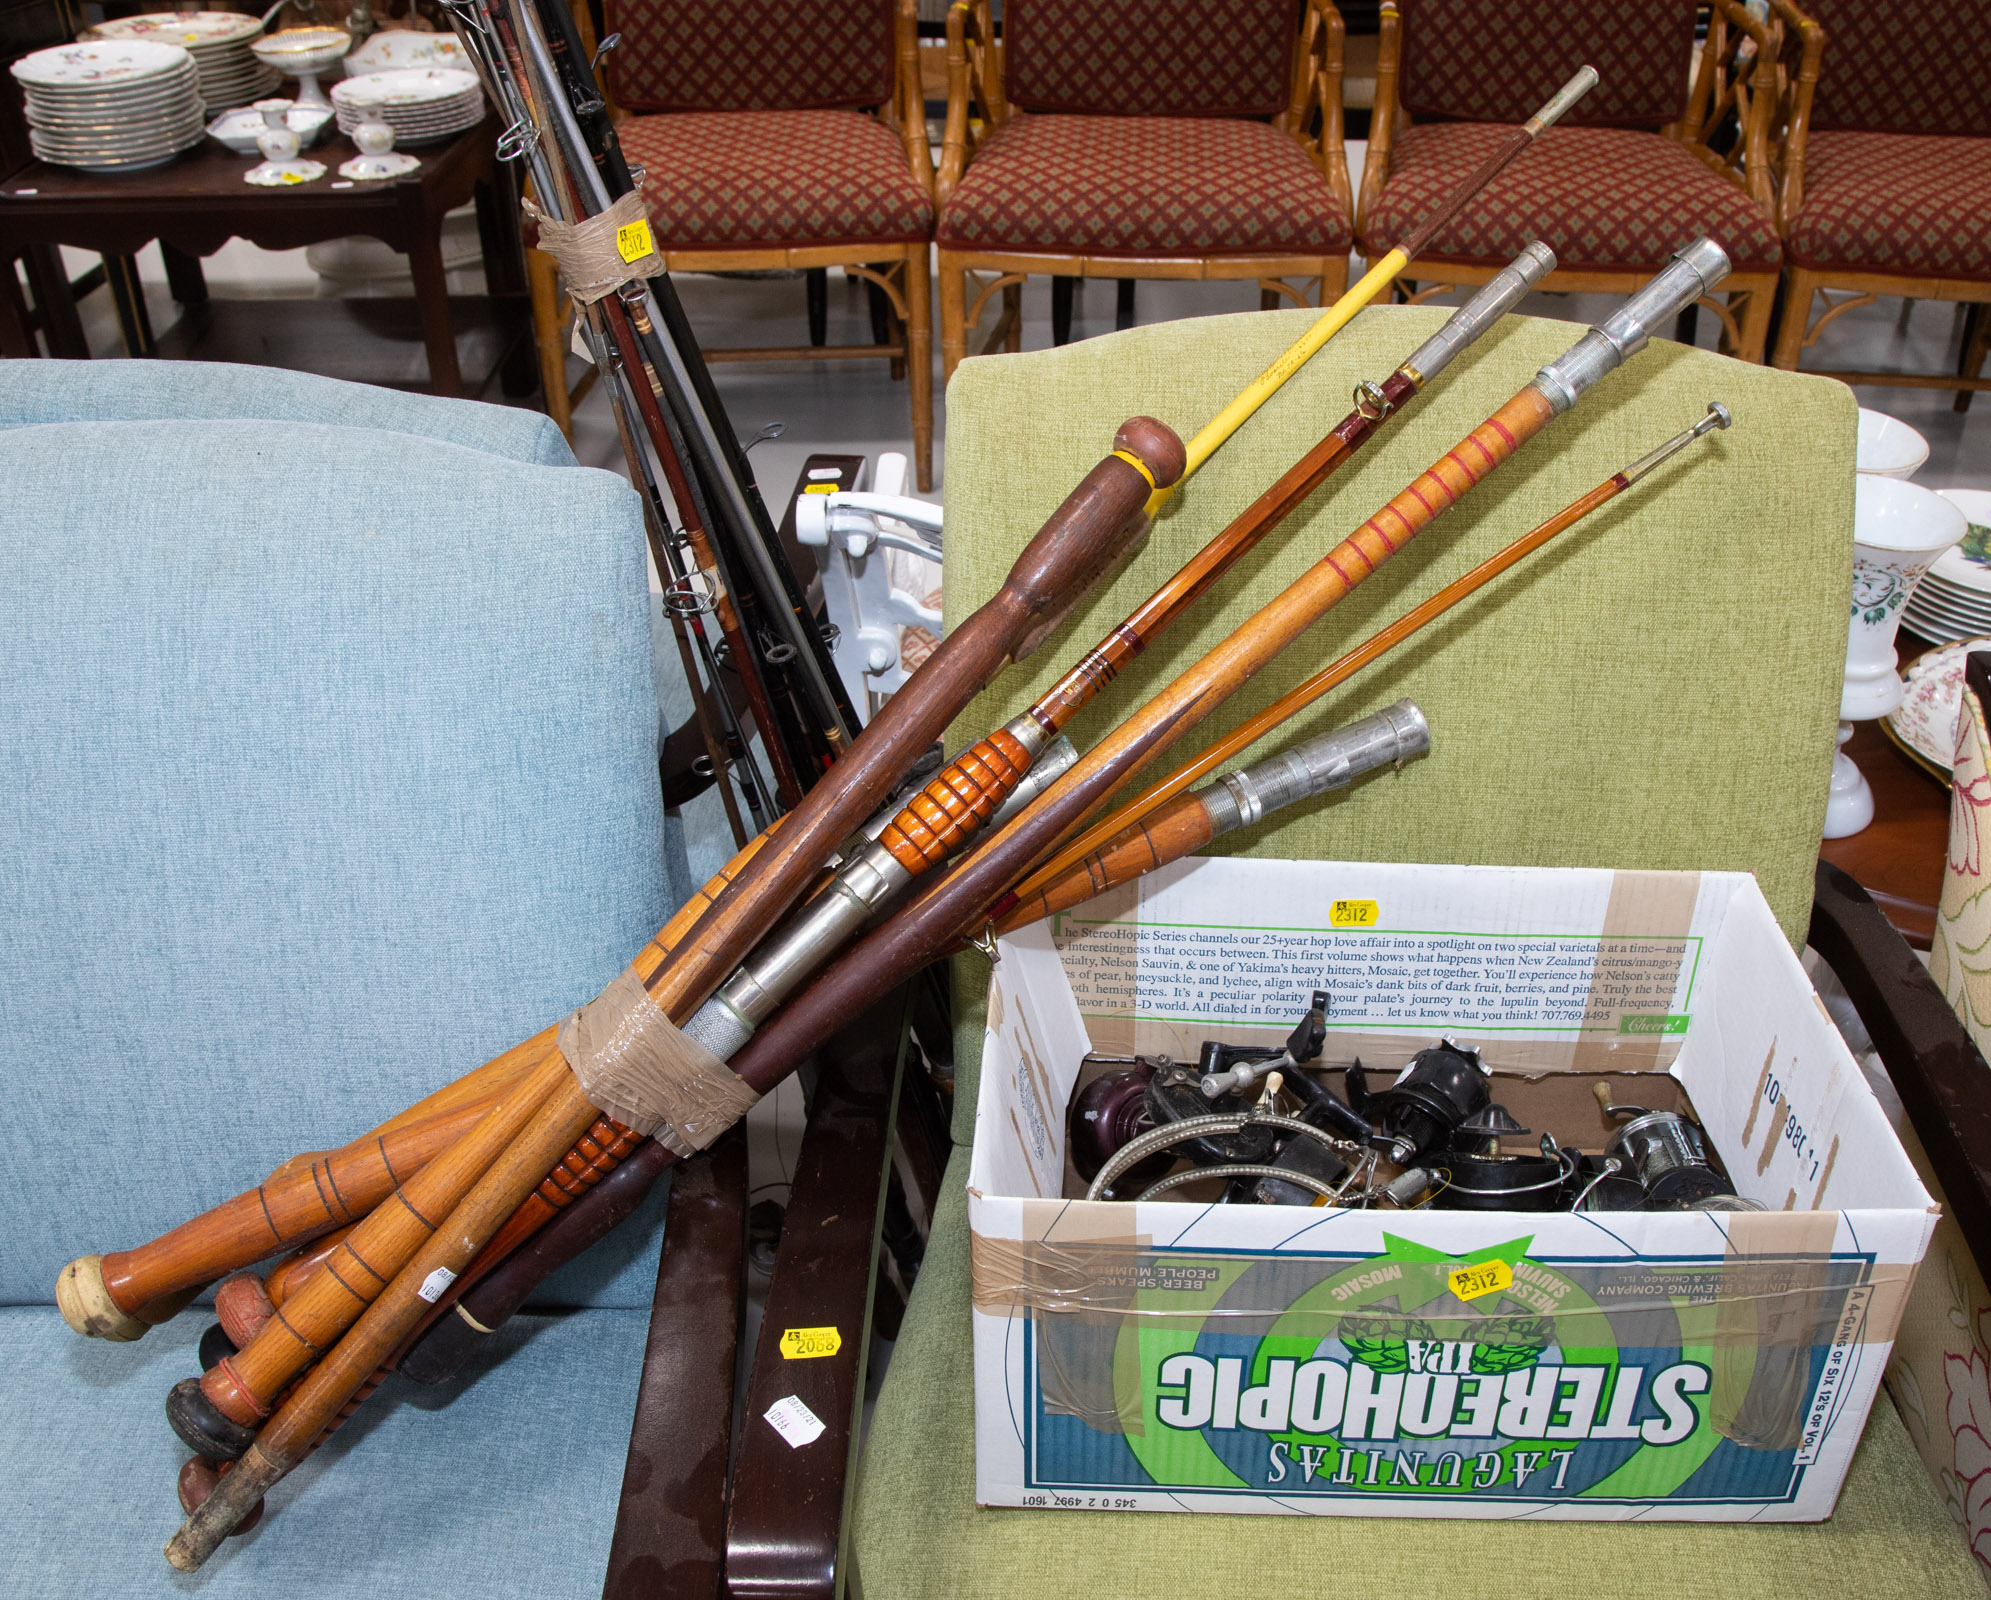 A COLLECTION OF FISHING RODS & REELS